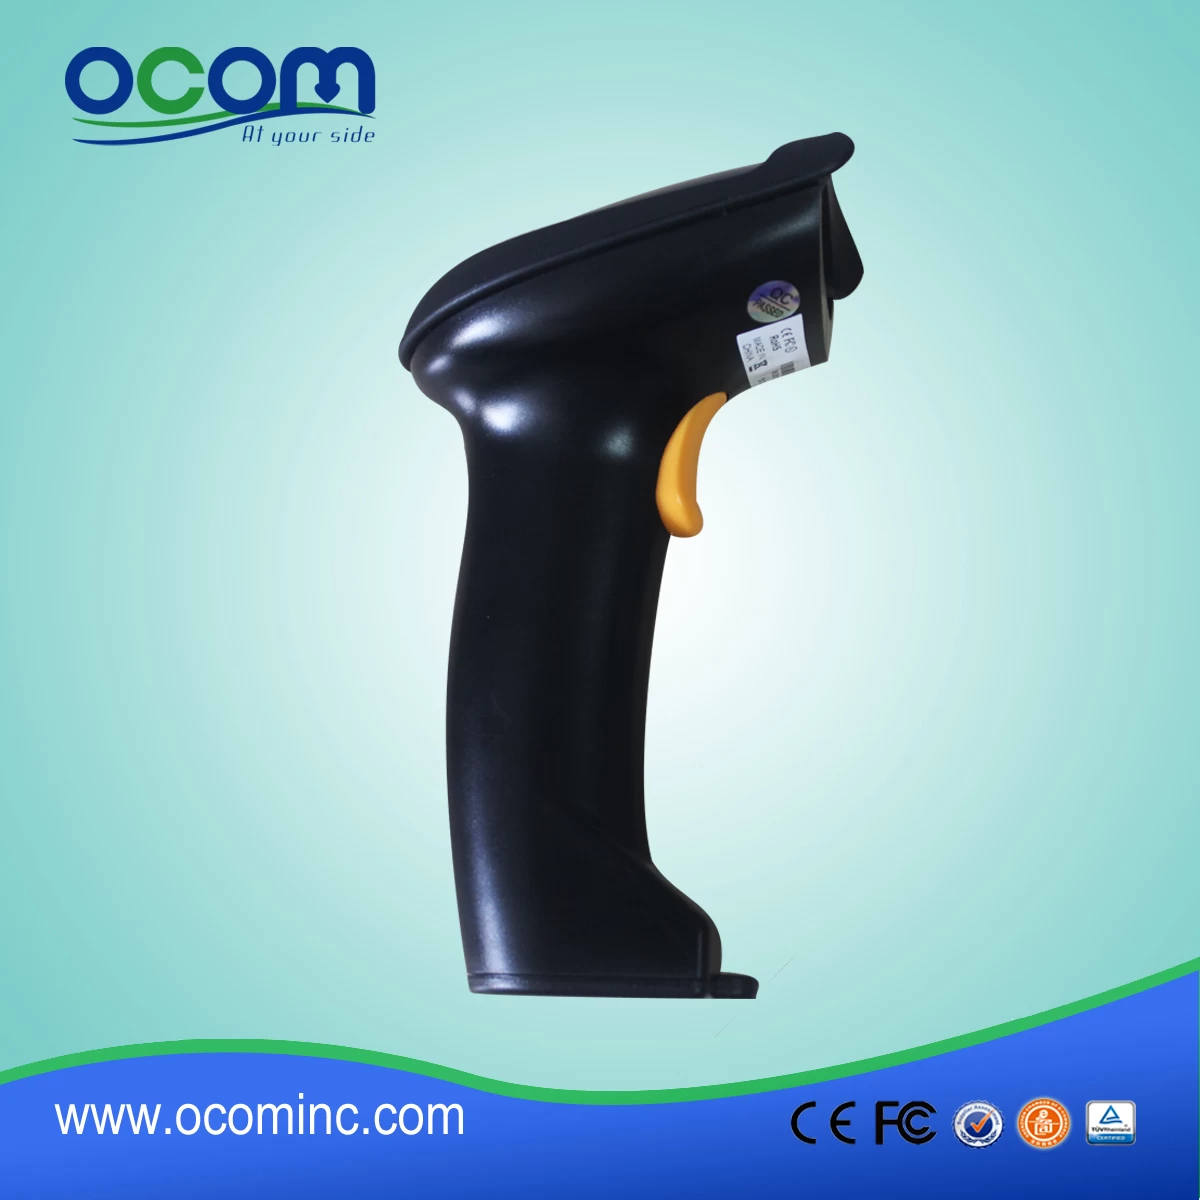 Android Bluetooth Barcode Scanner OCBS-W700-B